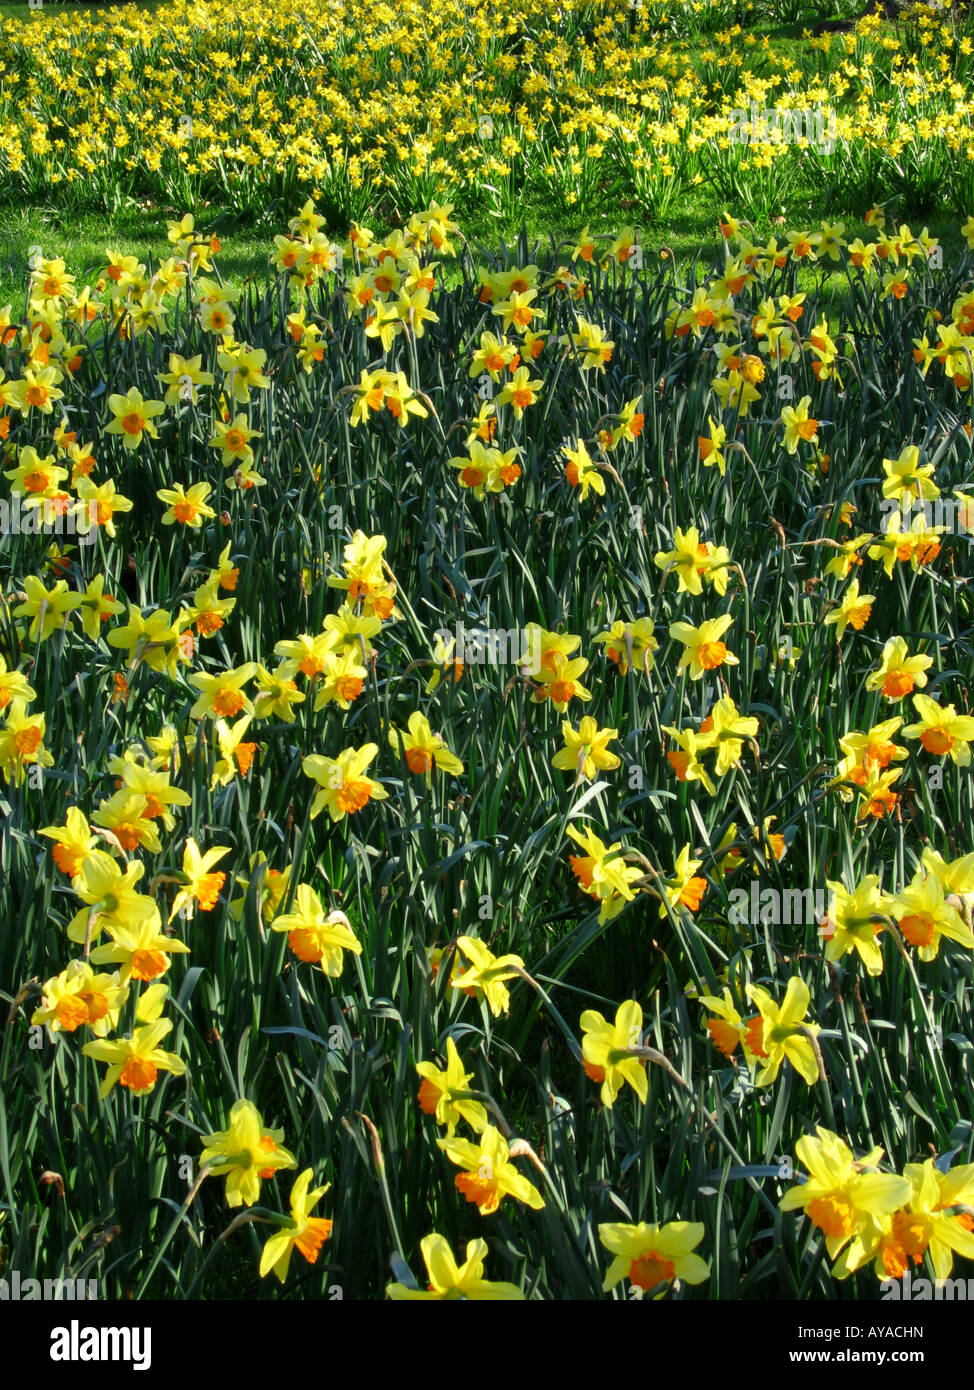 Daffodils flowering in Spring in St James s Park City of Westminster London England UK Stock Photo